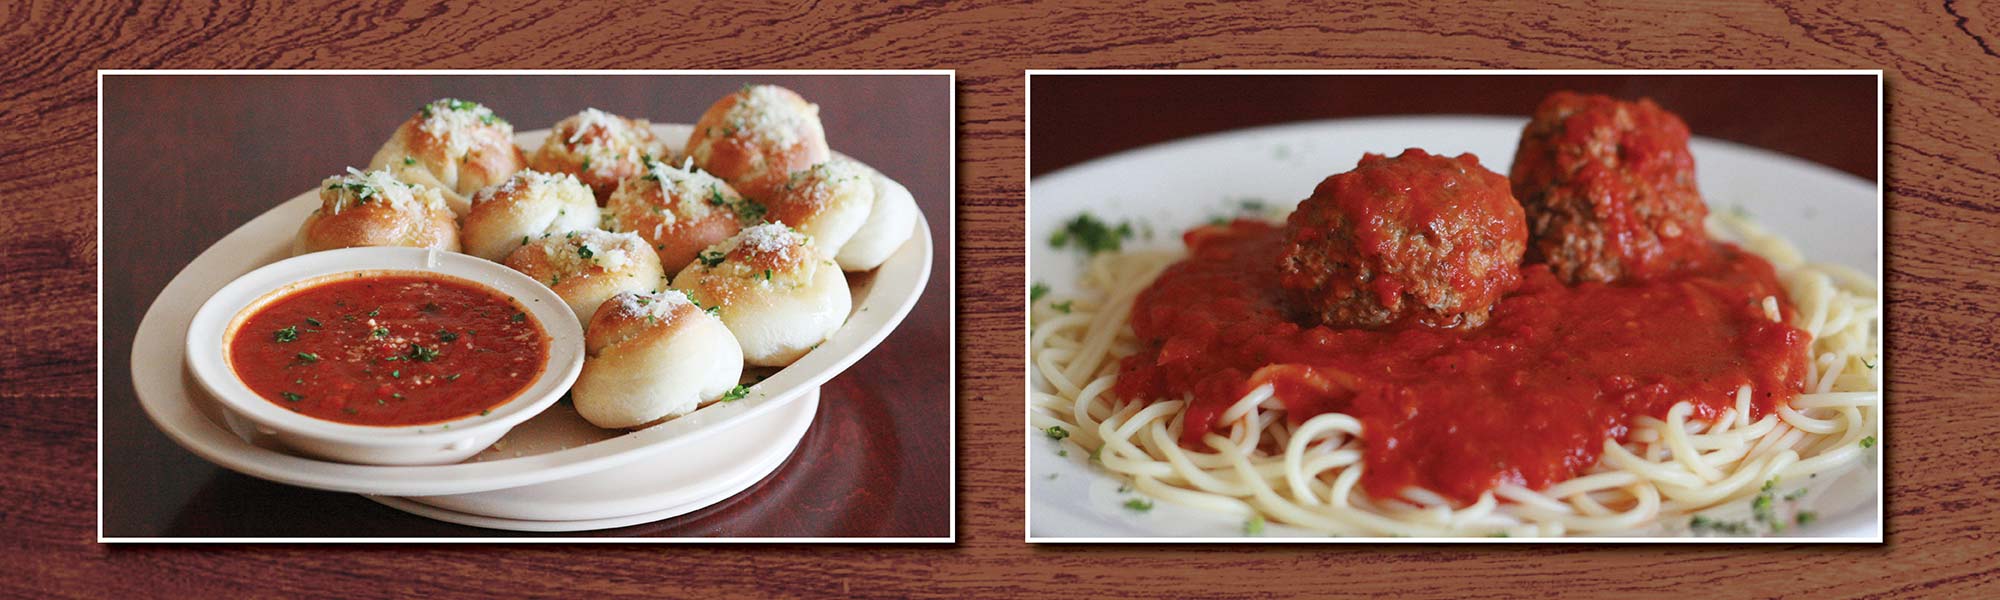 An appetizer and italian entree